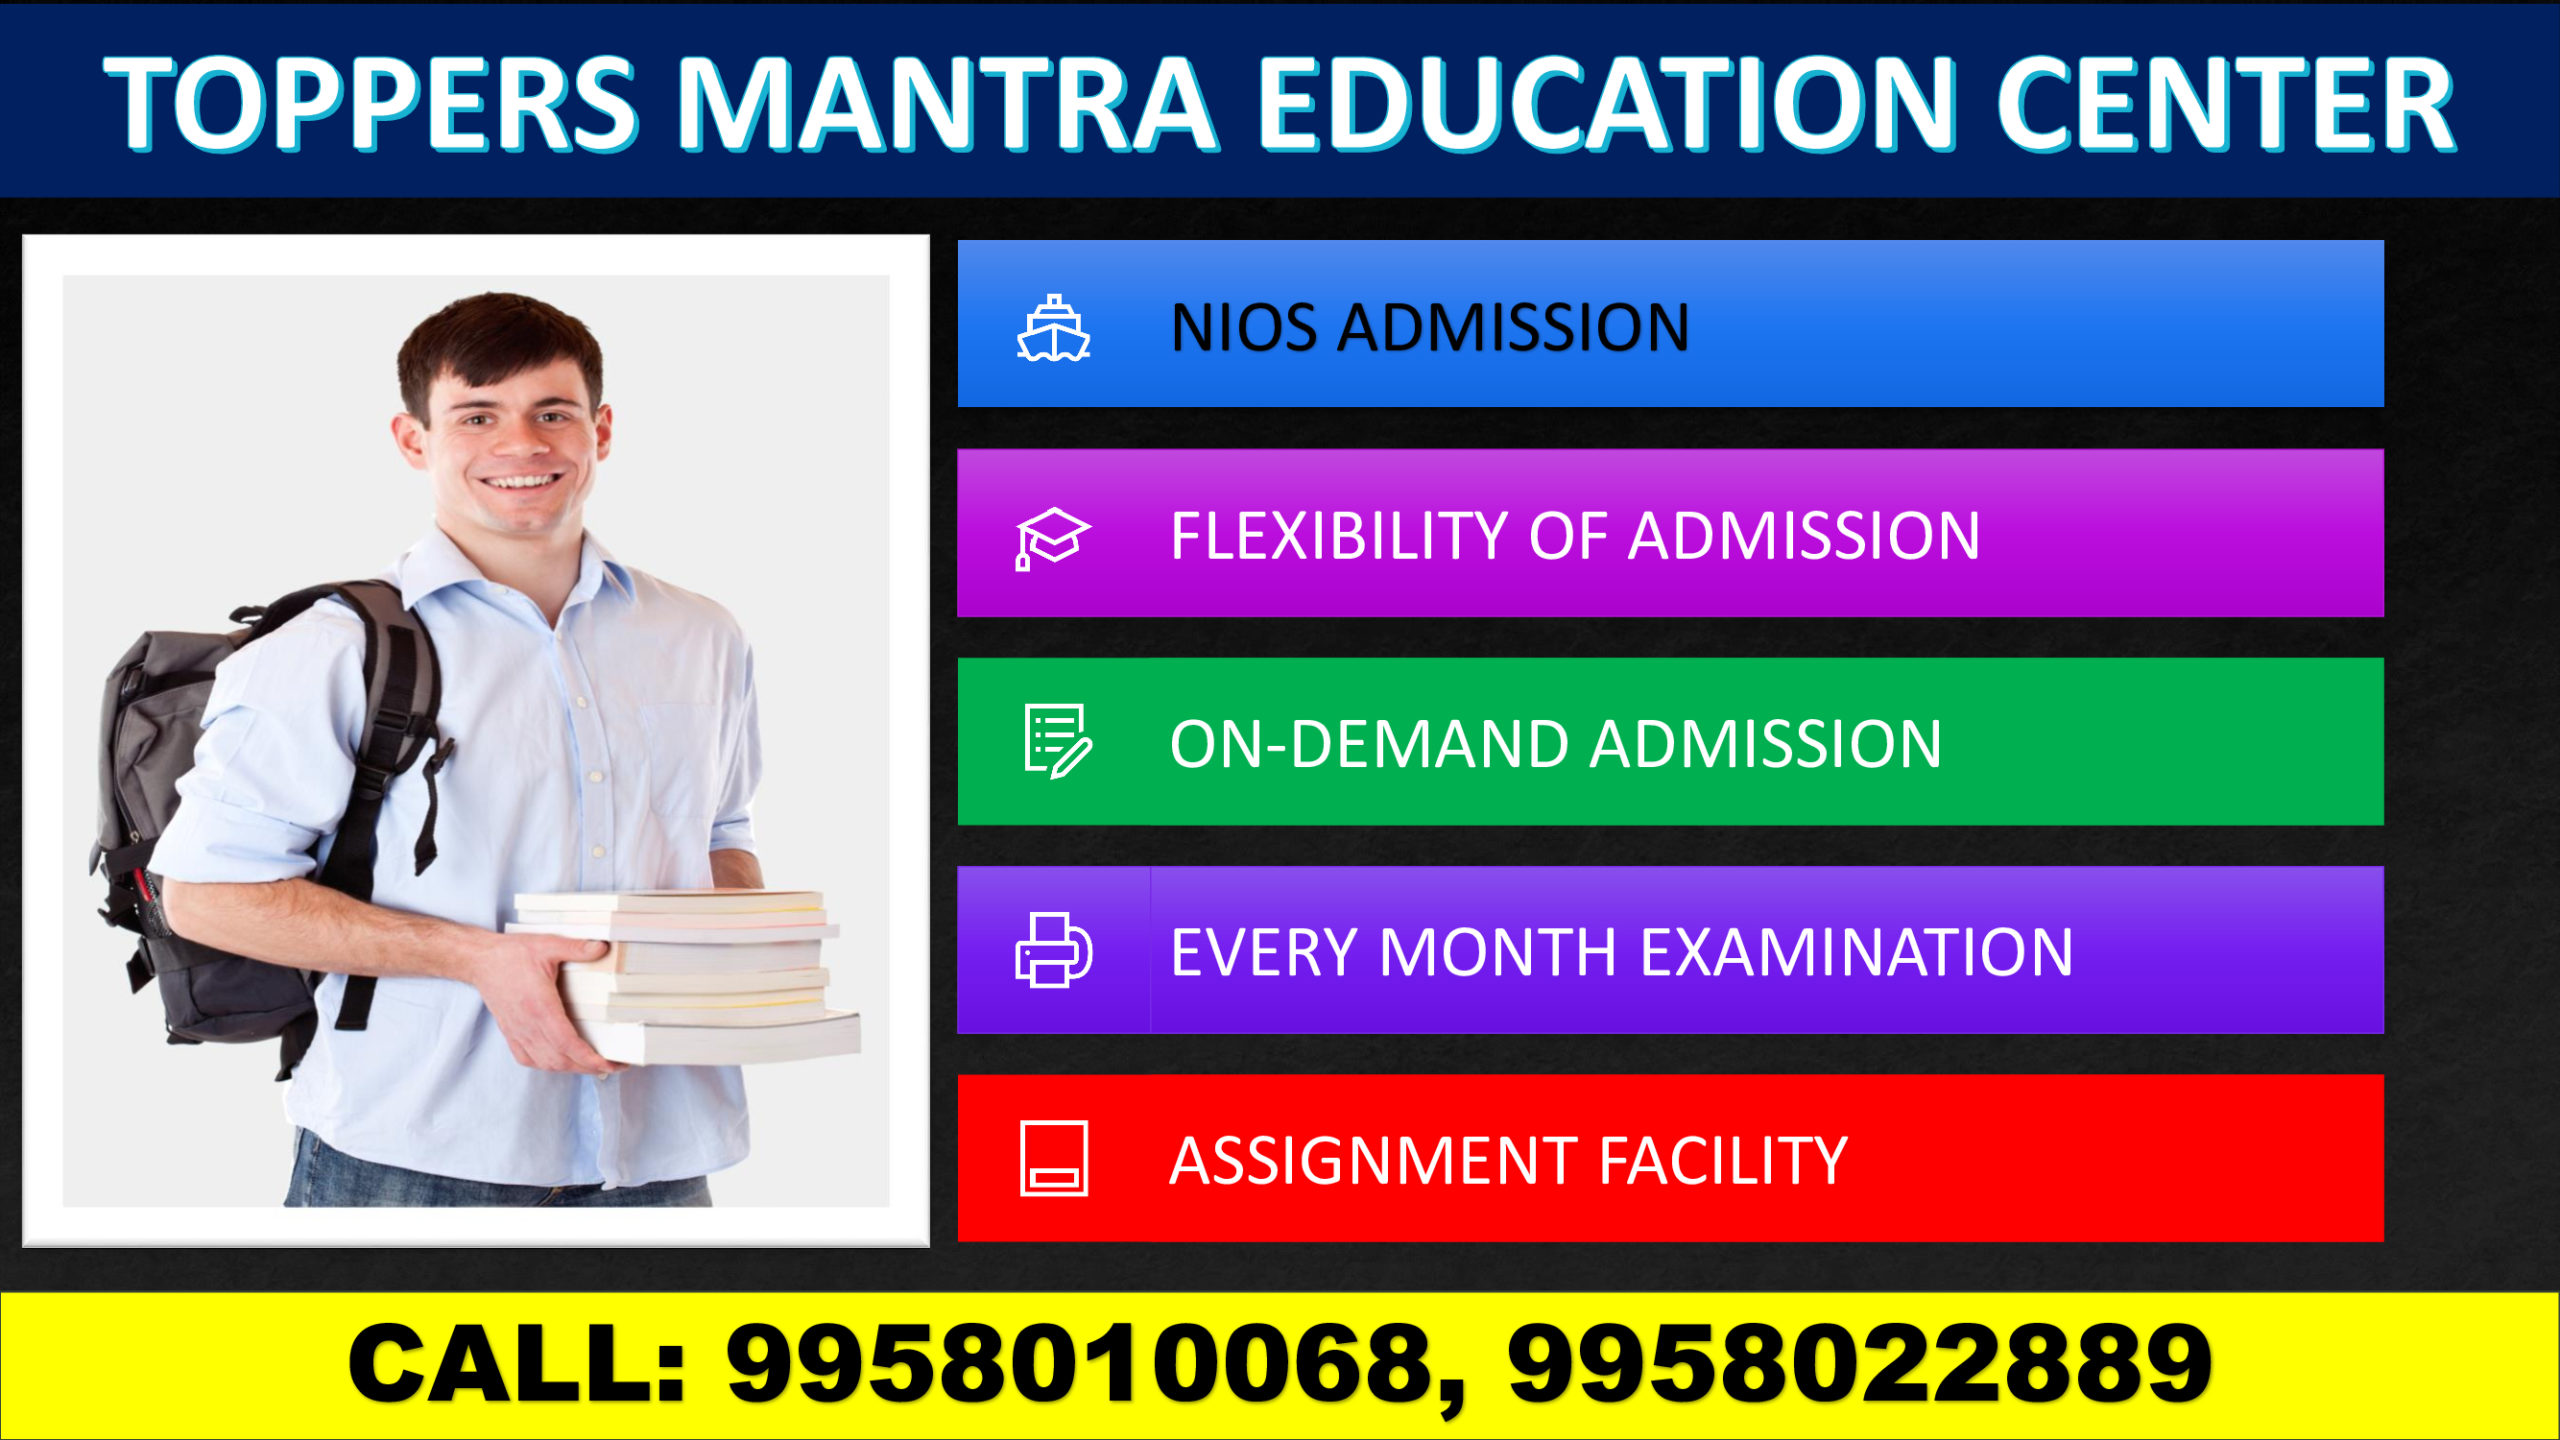 nios-admission-stream 1-block 2-toppers-mantra-education-center